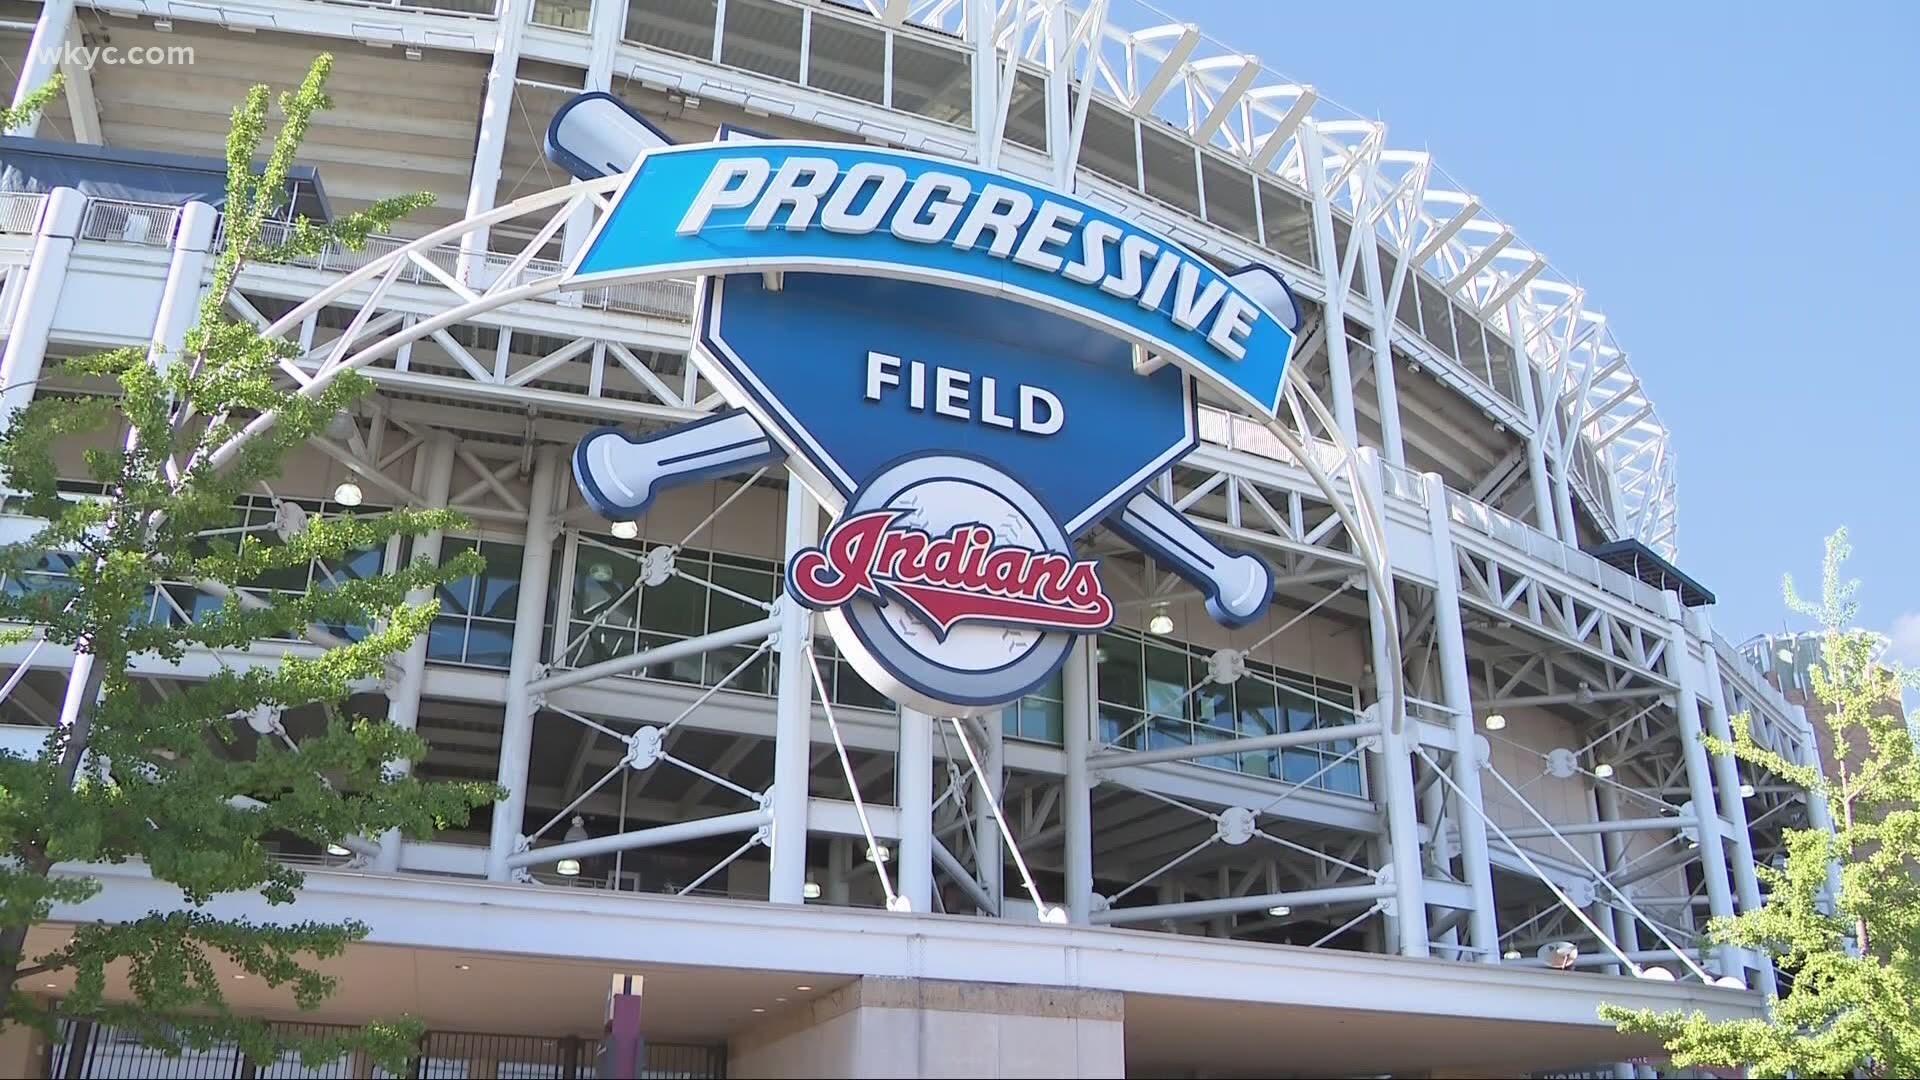 The Cleveland Indians now plan to engage with fans, community leaders, and others to select what will ultimately be the new moniker. Nick Camino has the latest.